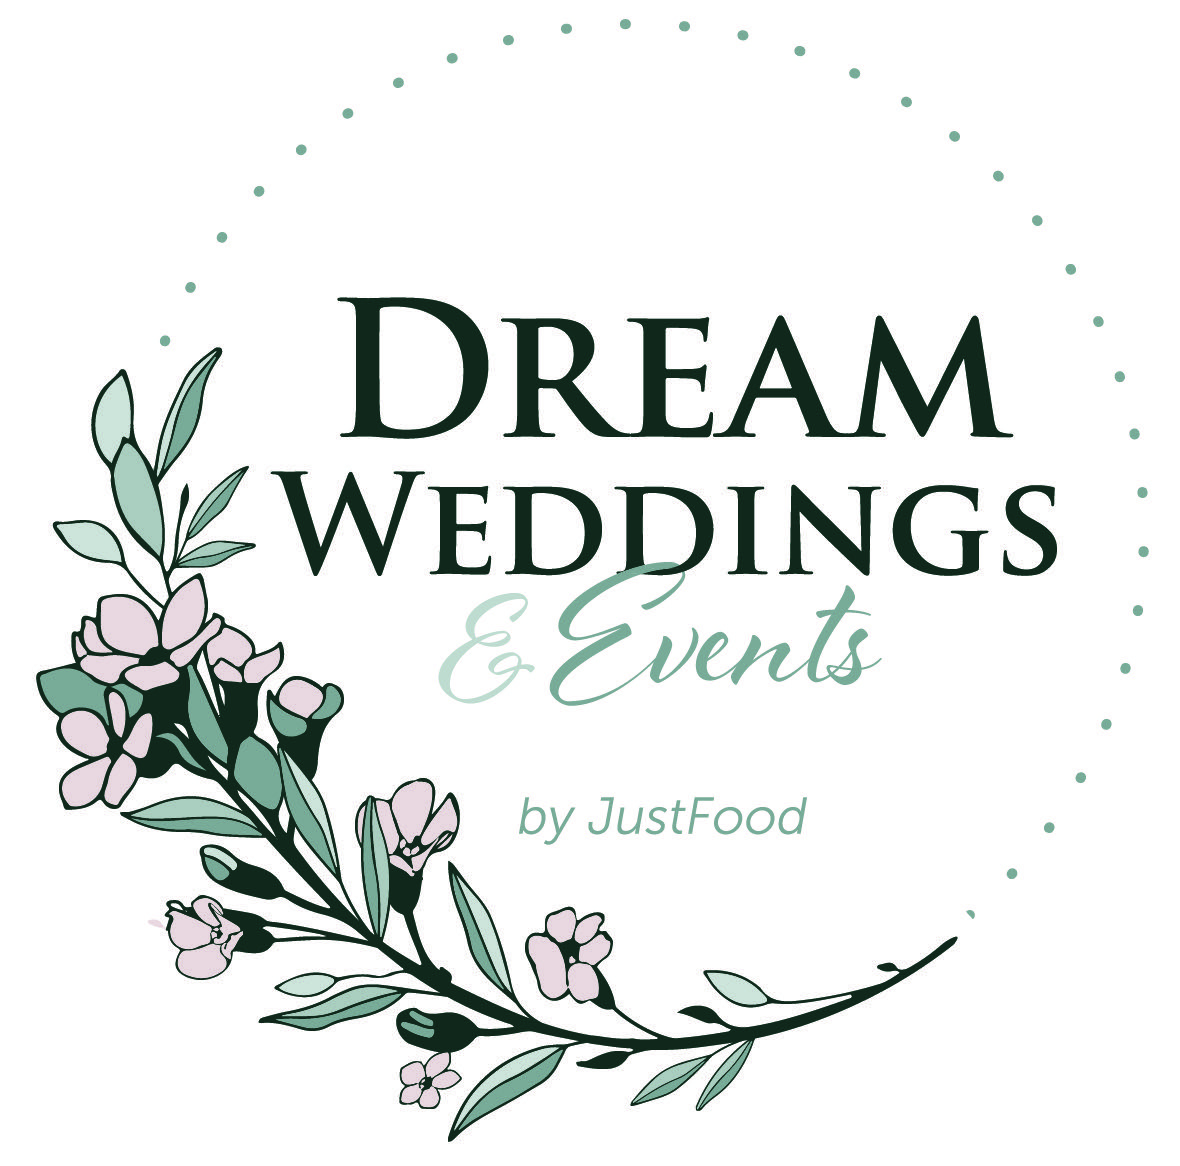 Dream Weddings and Events by Just Food